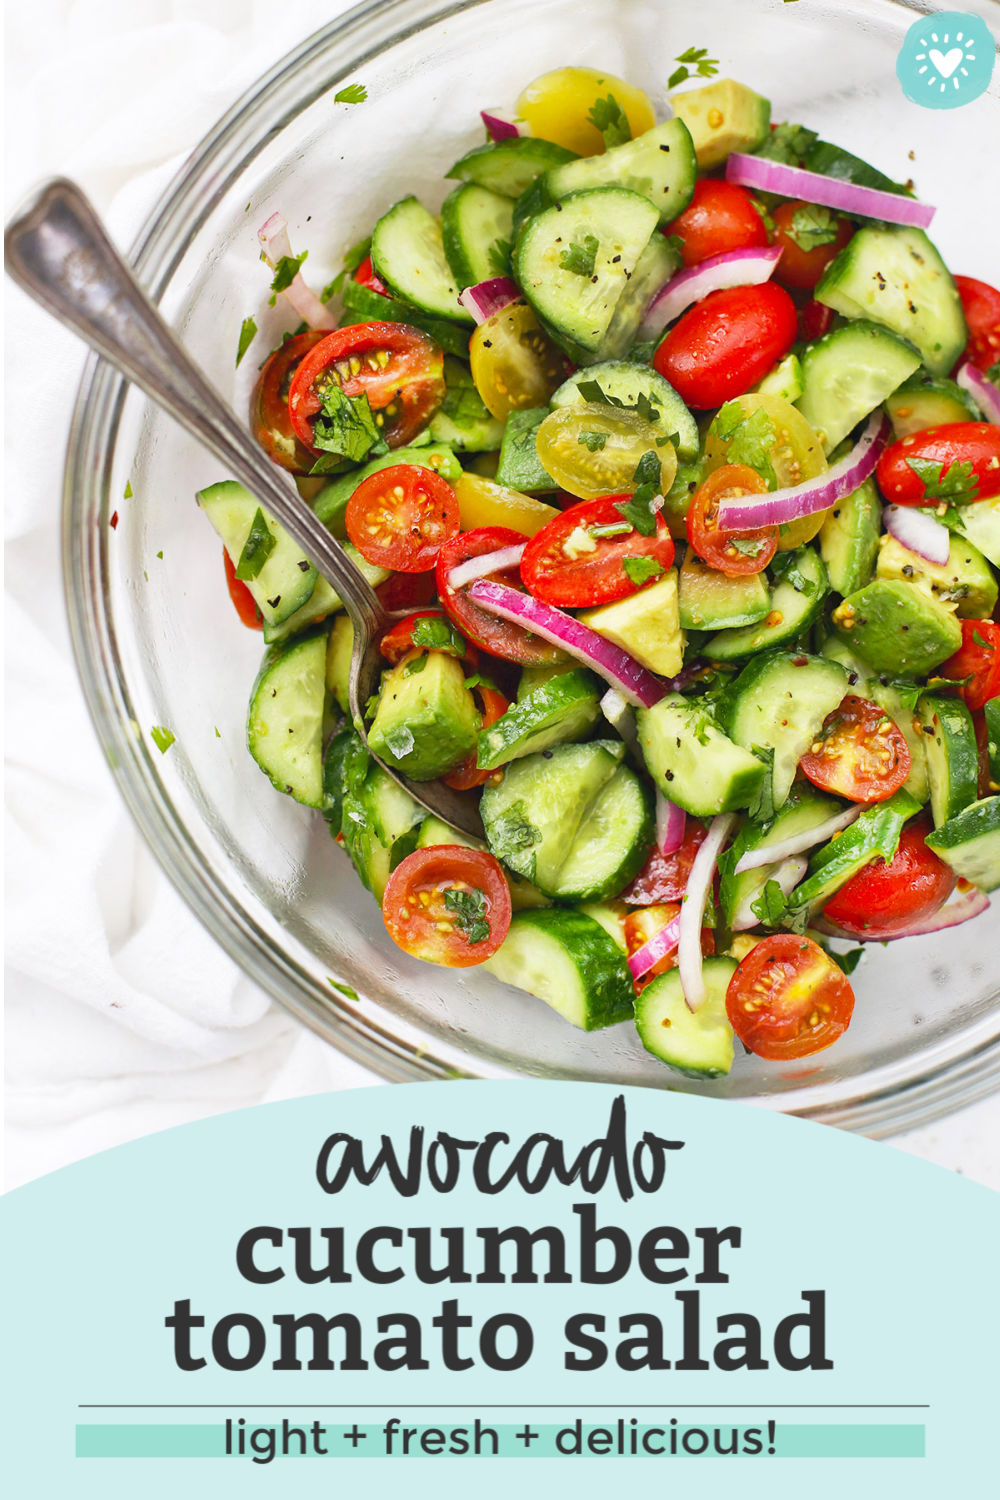 with text overlay that reads "avocado cucumber tomato salad. Light + fresh + delicious!"